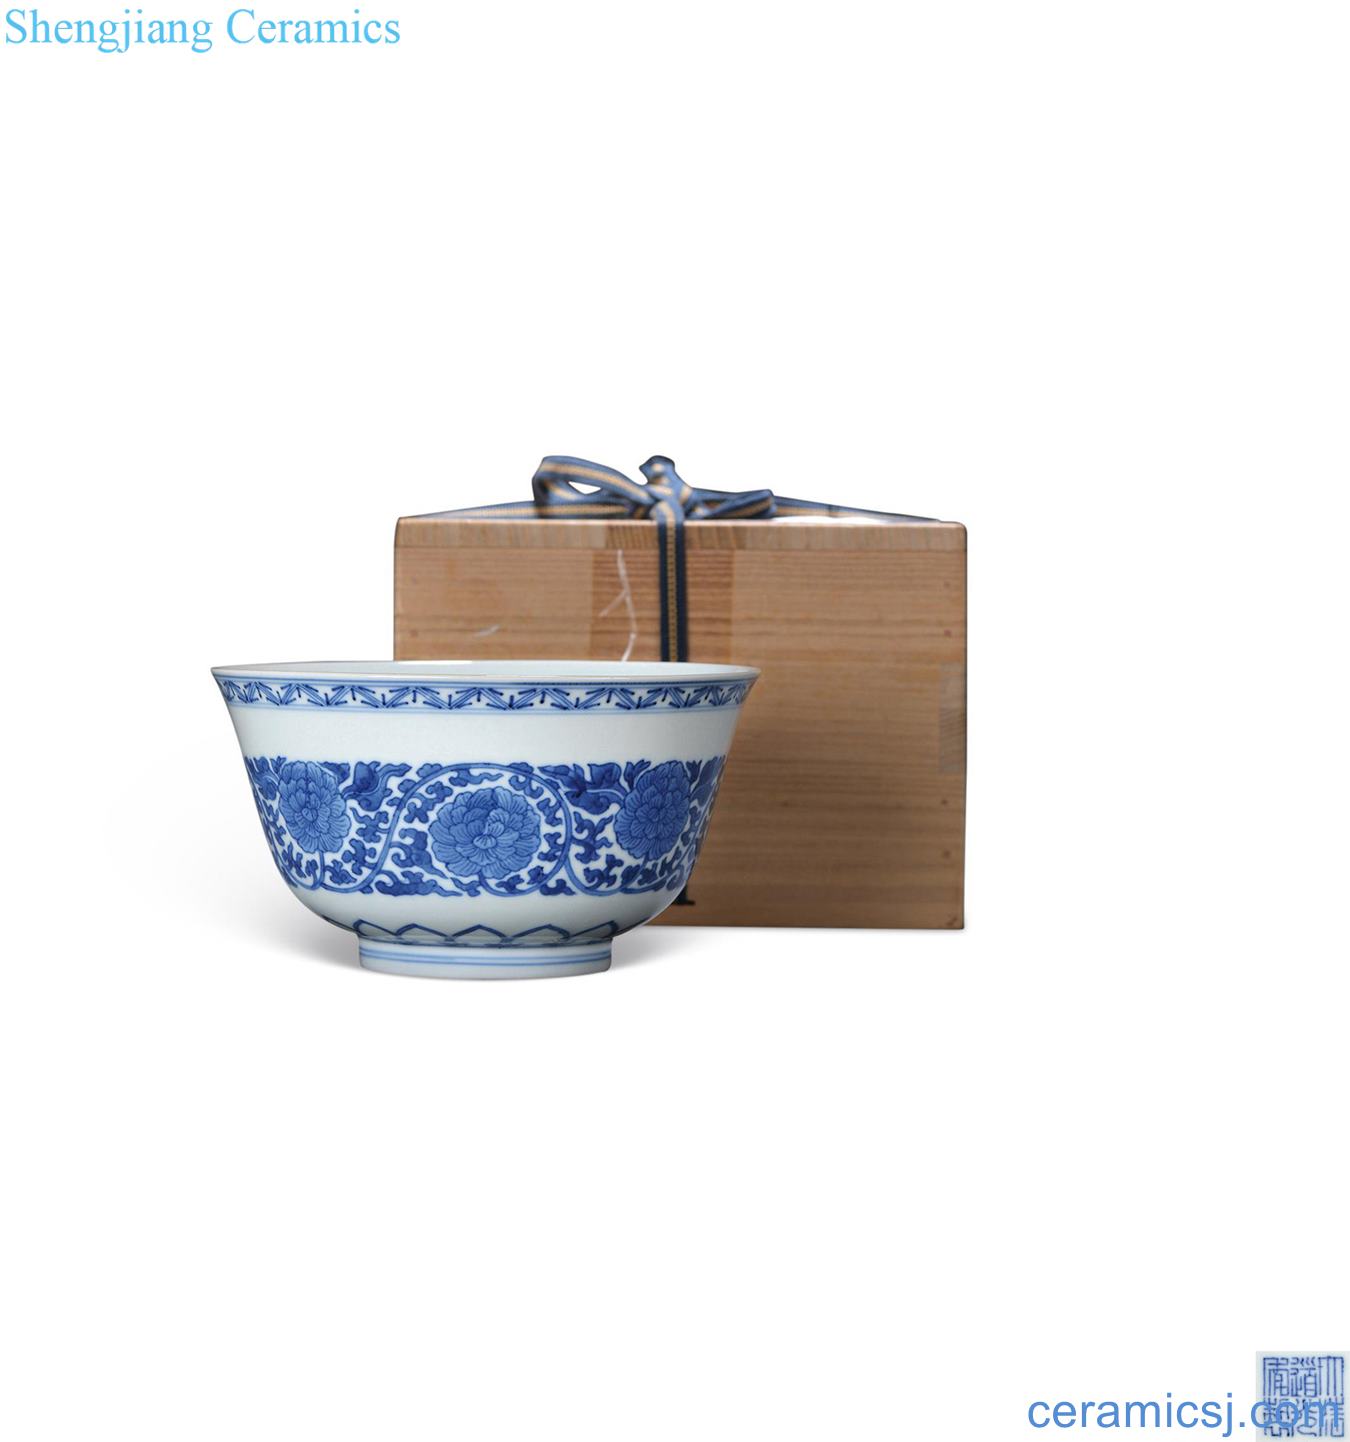 Qing daoguang Blue and white lotus flower bowls